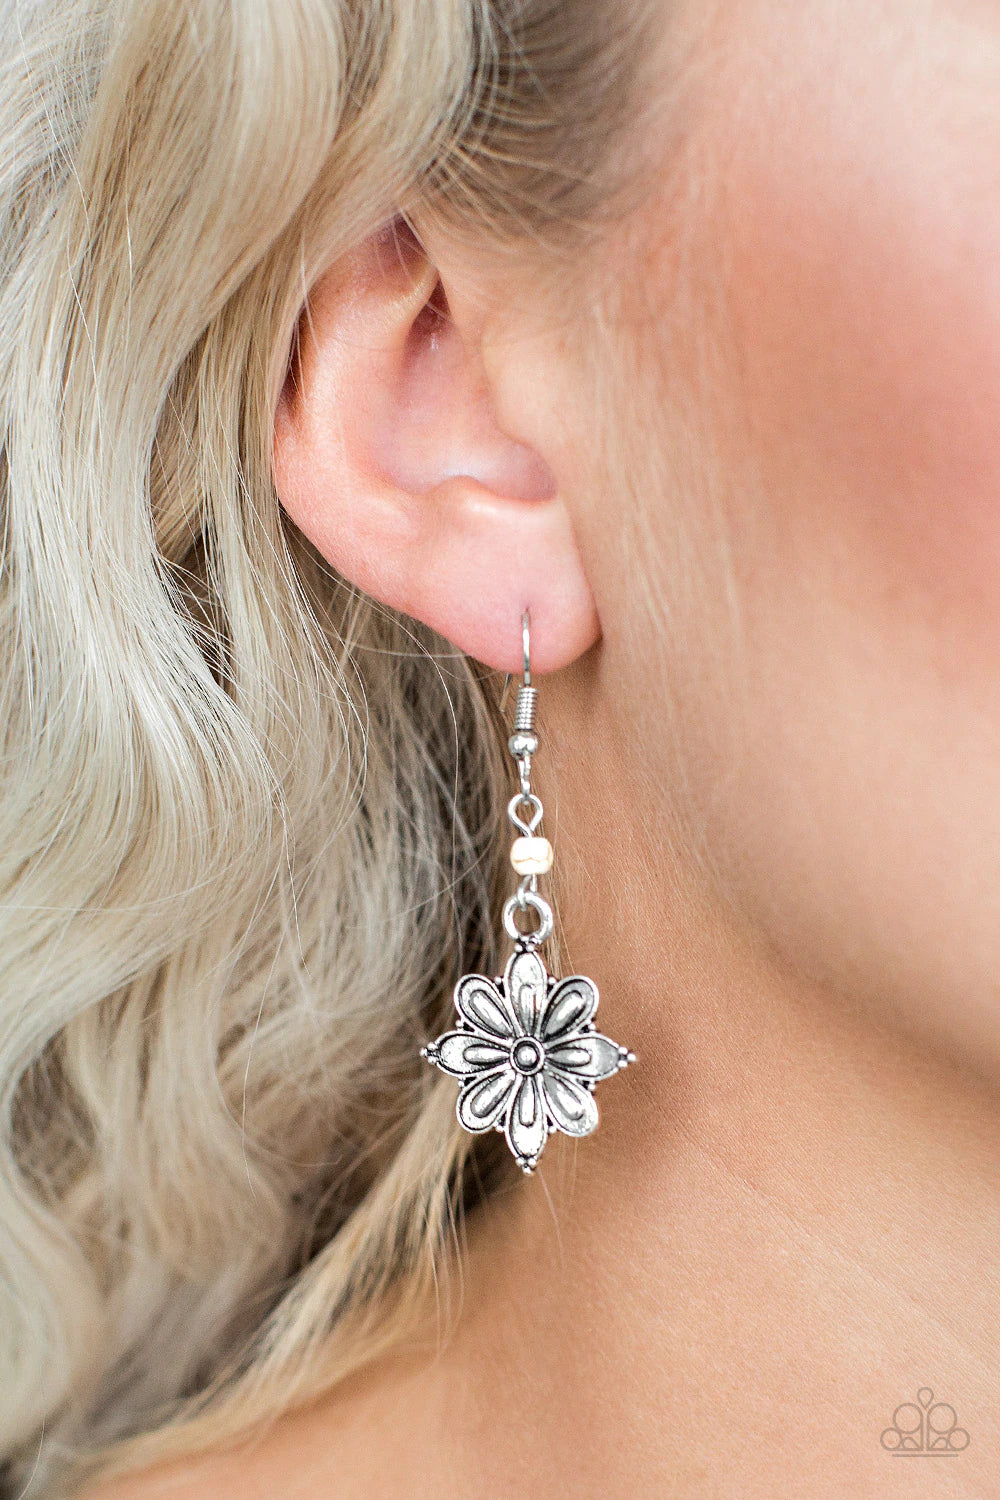 Cactus Blossom Silver White Floral Earrings - Paparazzi Accessories